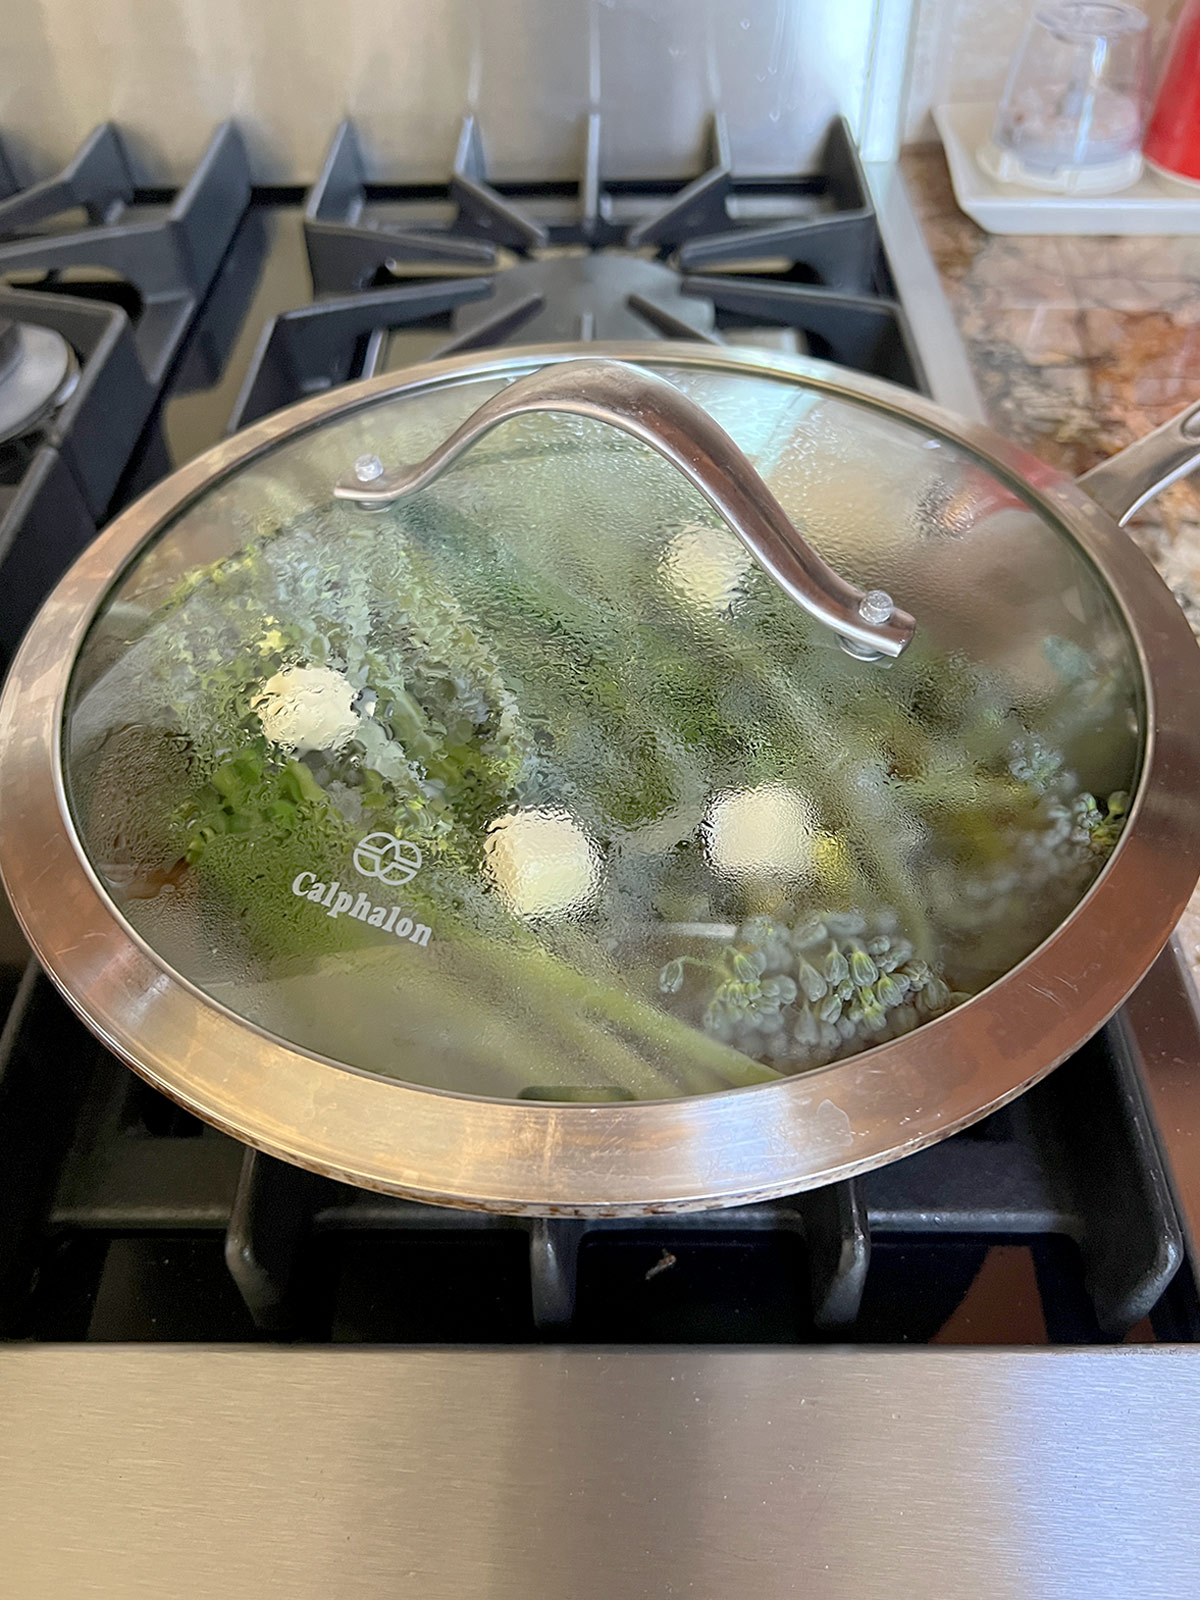 Broccolini pan covered but liquid accumulating on the clear glass cover.